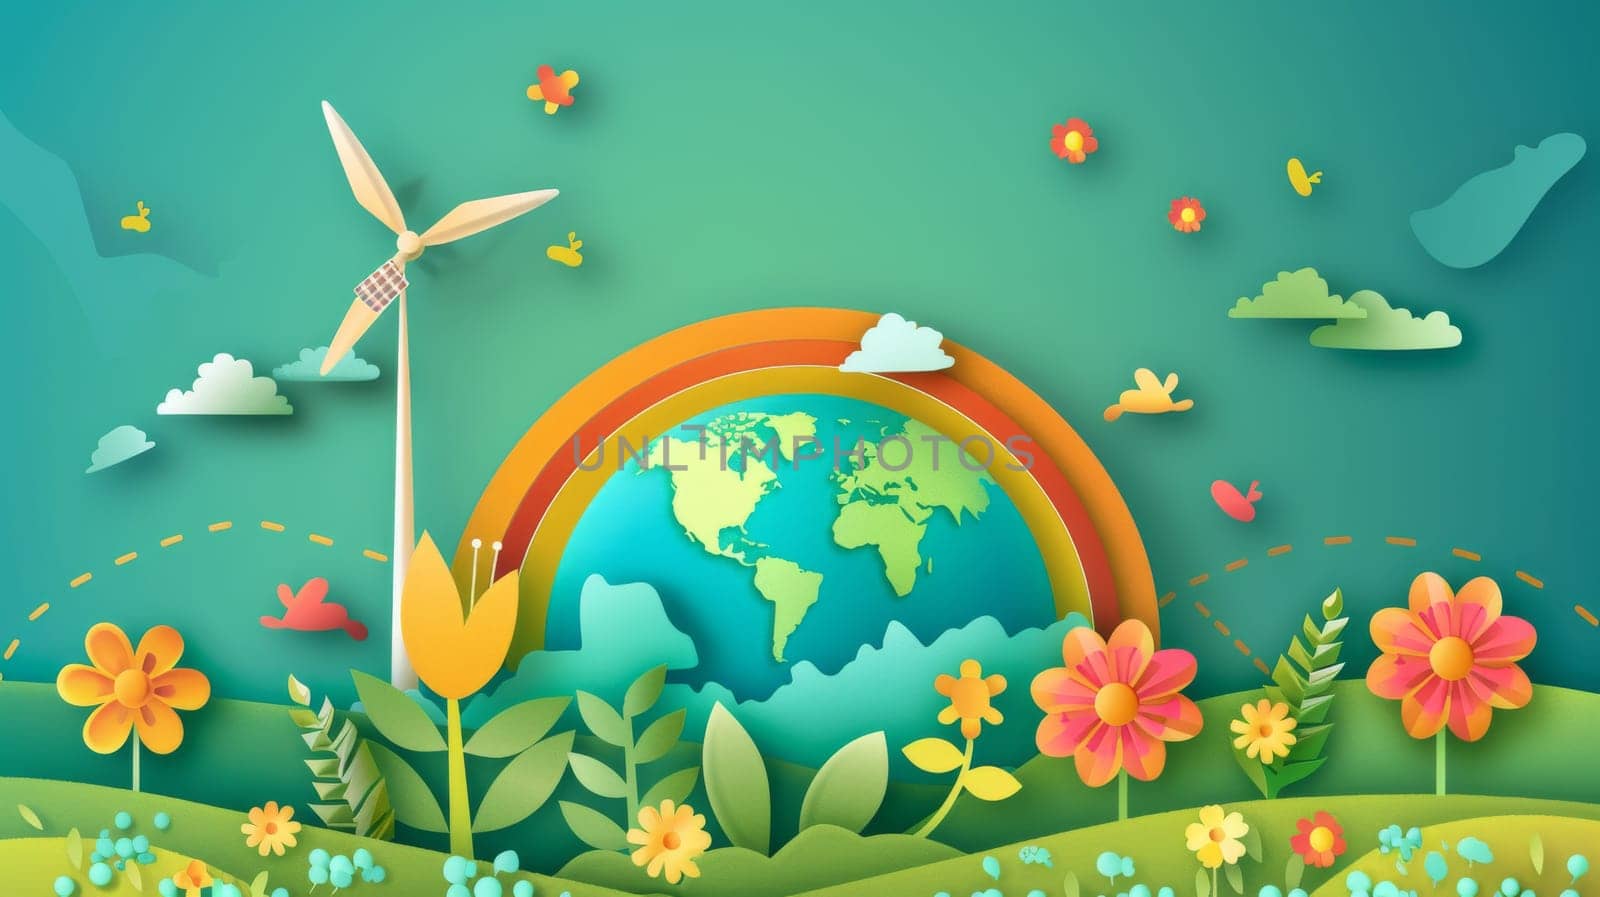 Modern illustration for web, banners, campaigns, social media posts on World Environment Day. Save the earth, globes, rainbows, windmills, flowers, and rainbows.